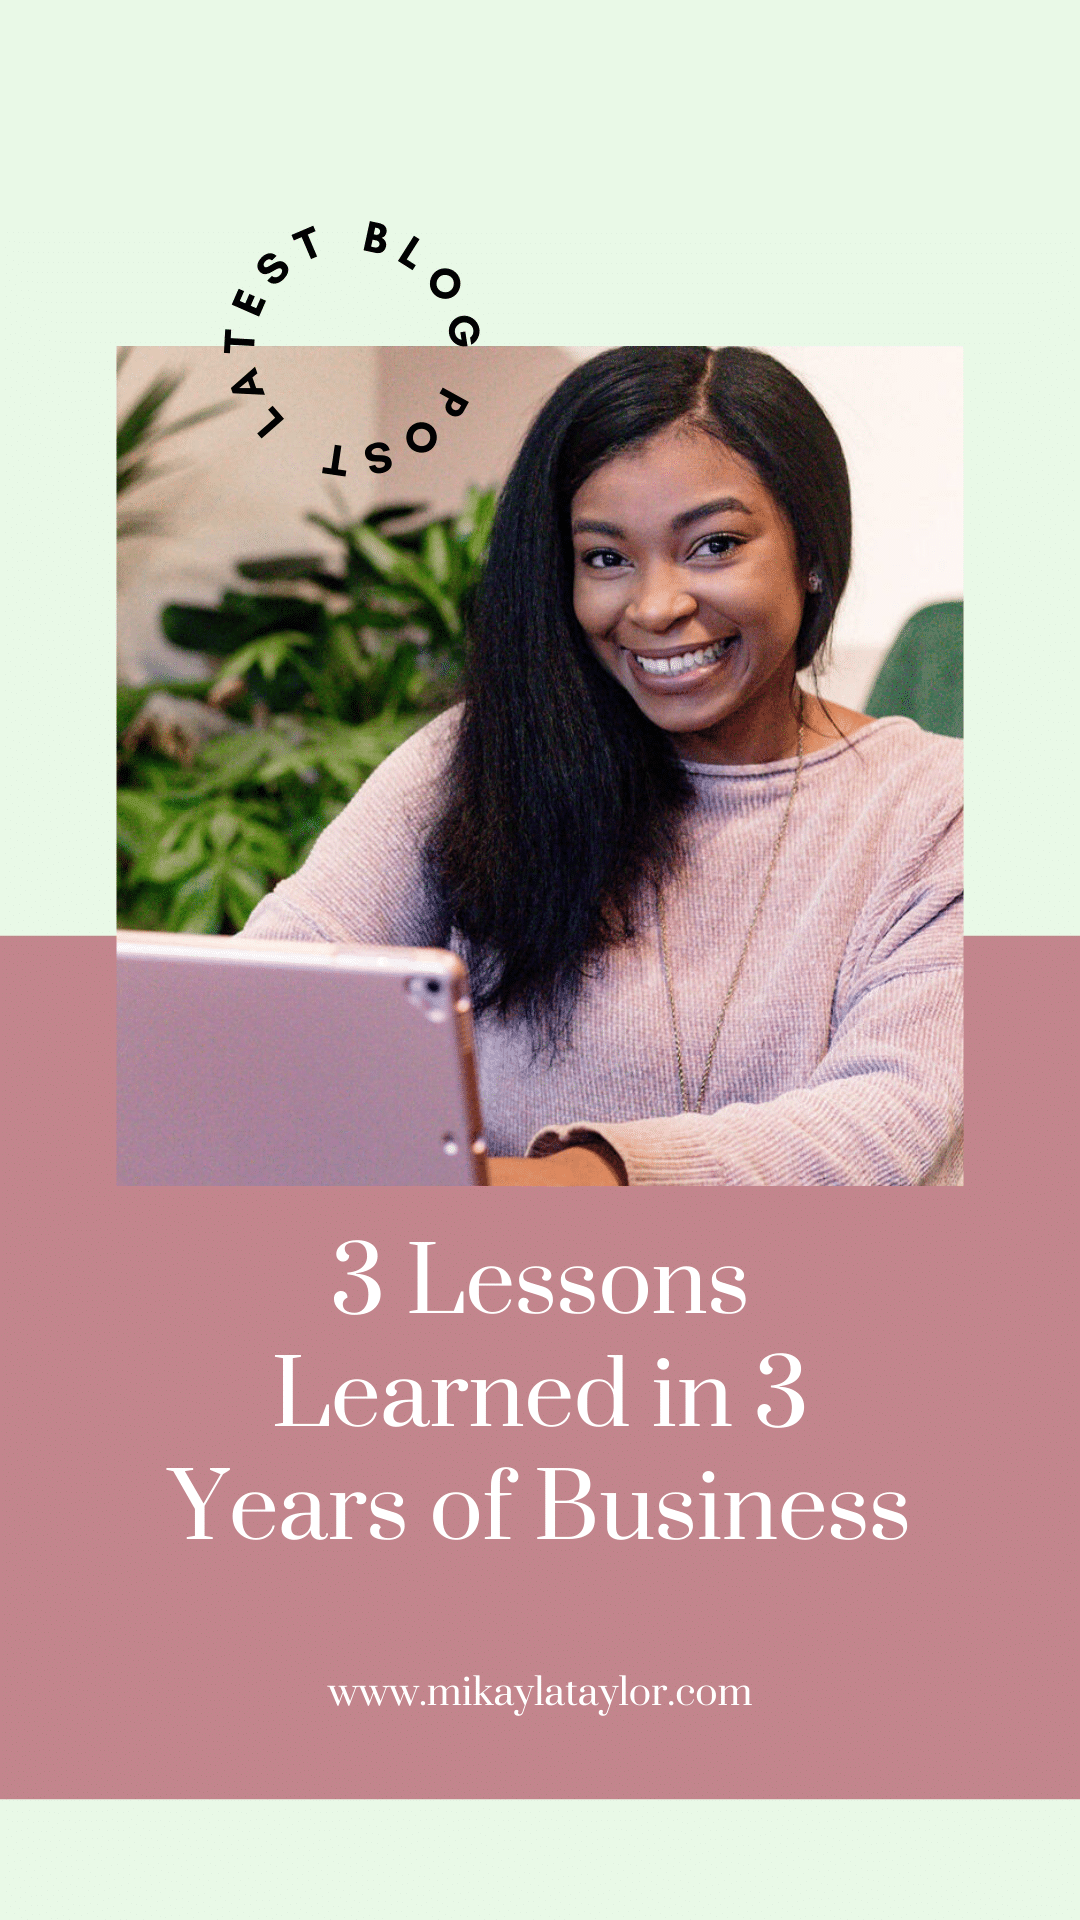 My 3 Biggest Lessons Learned in 3 Years of Business